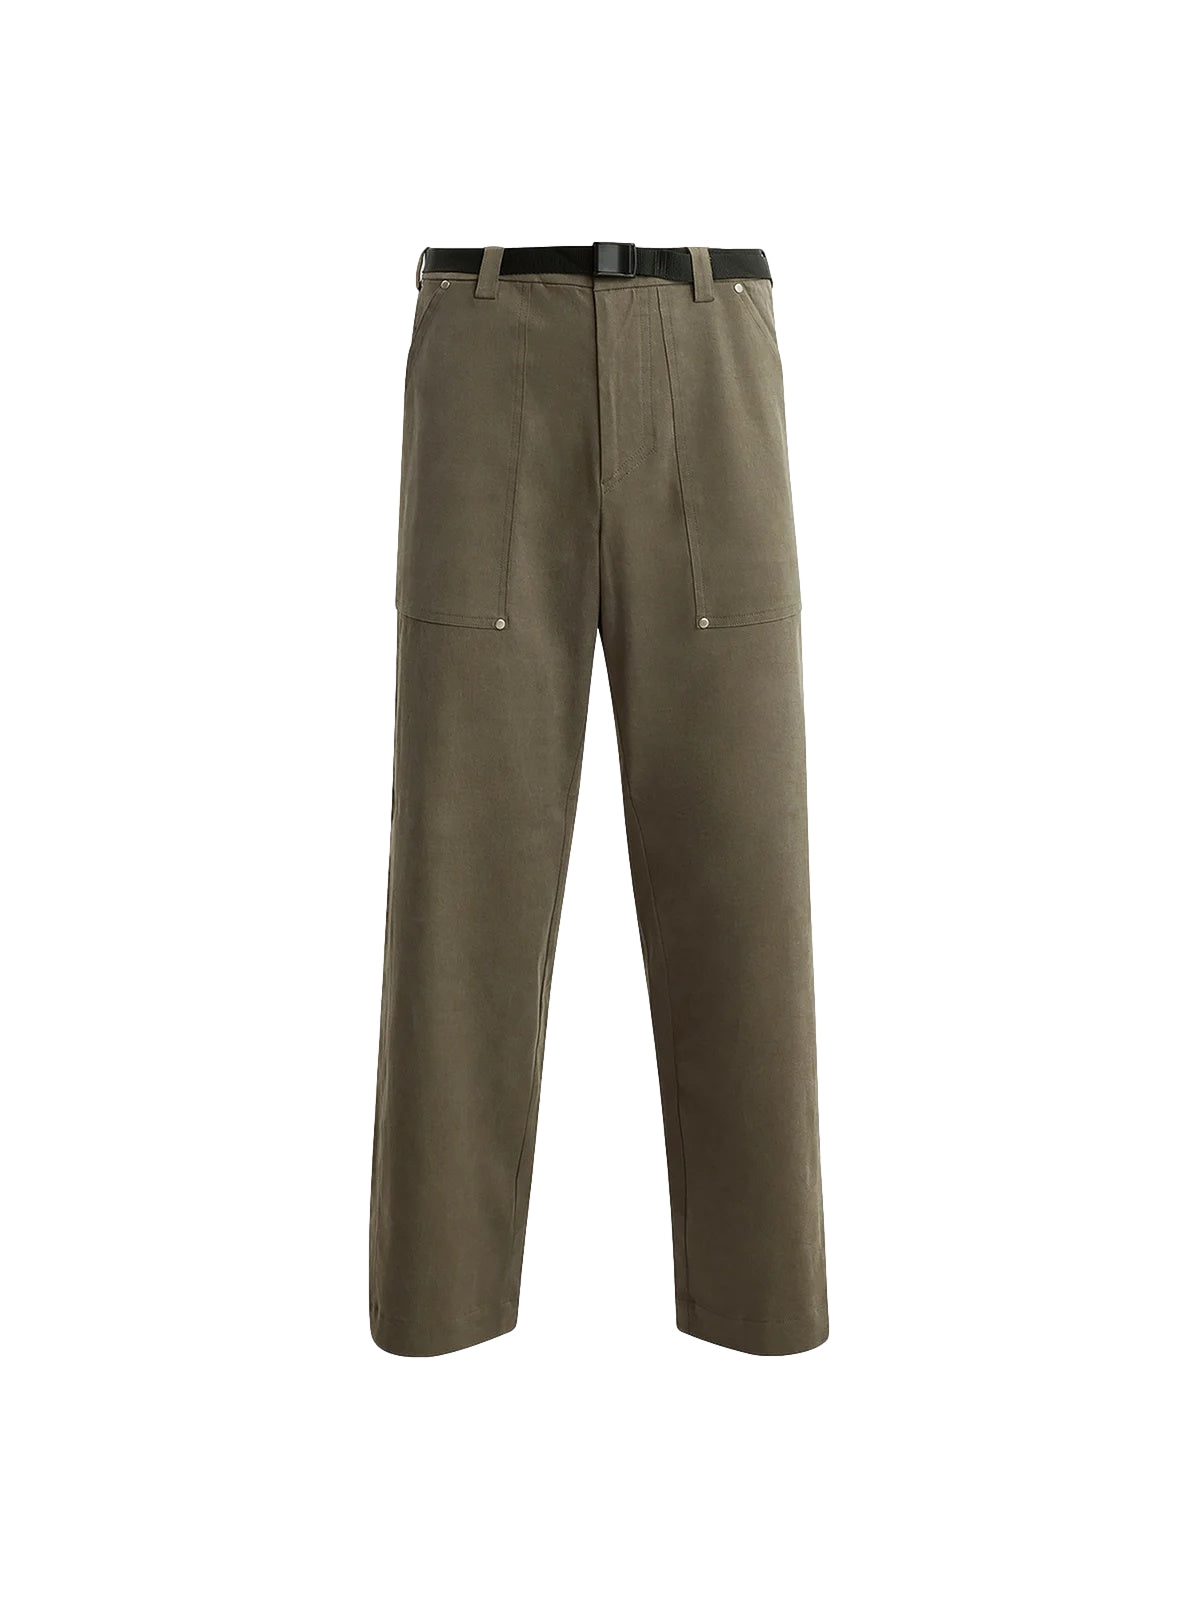 Holzweiler Lopa Worker Trouser Bukse Army - [shop.name]